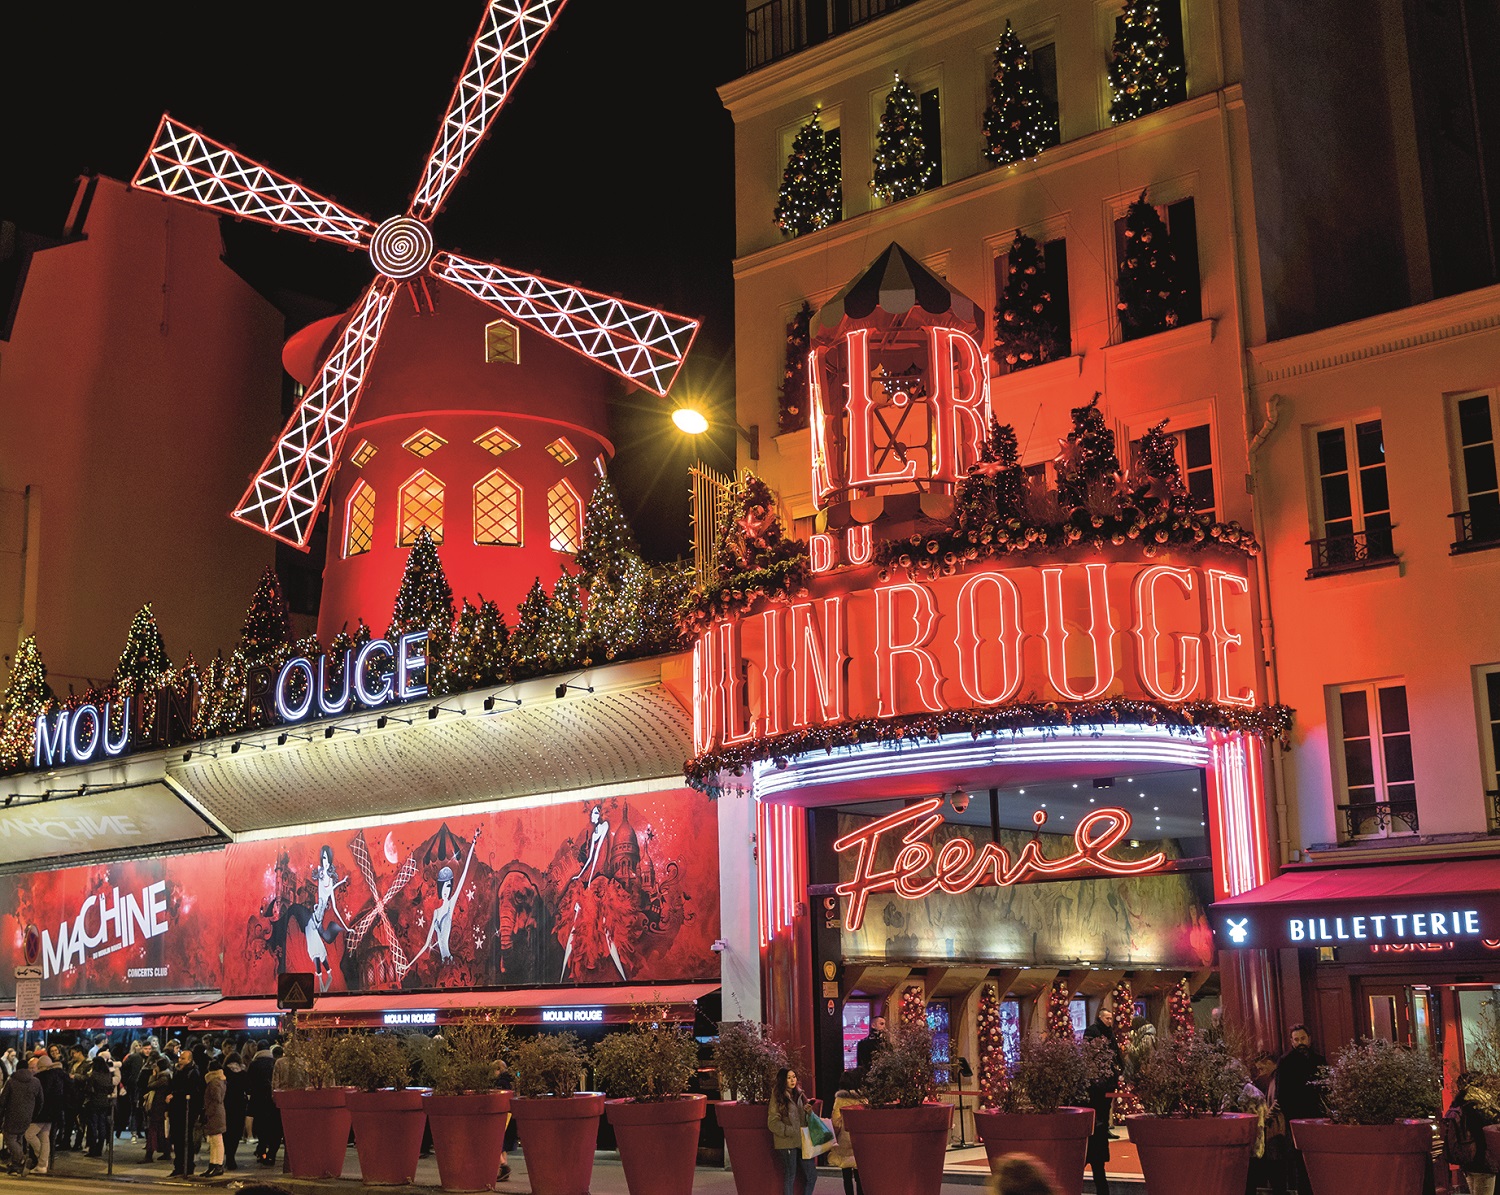 PARIS, FRANCE - DECEMBER 30: Moulin Rouge on December 30, 2019 in Paris, France. Moulin Rouge is a cabaret in Paris. The original house, which burned down in 1915, was co-founded in 1889 by Charles Zidler and Joseph Oller. Moulin Rouge is best known as the birthplace of the modern form of the can-can dance. Moulin Rouge is a tourist attraction, offering musical dance entertainment. (Photo by Athanasios Gioumpasis/Getty Images)